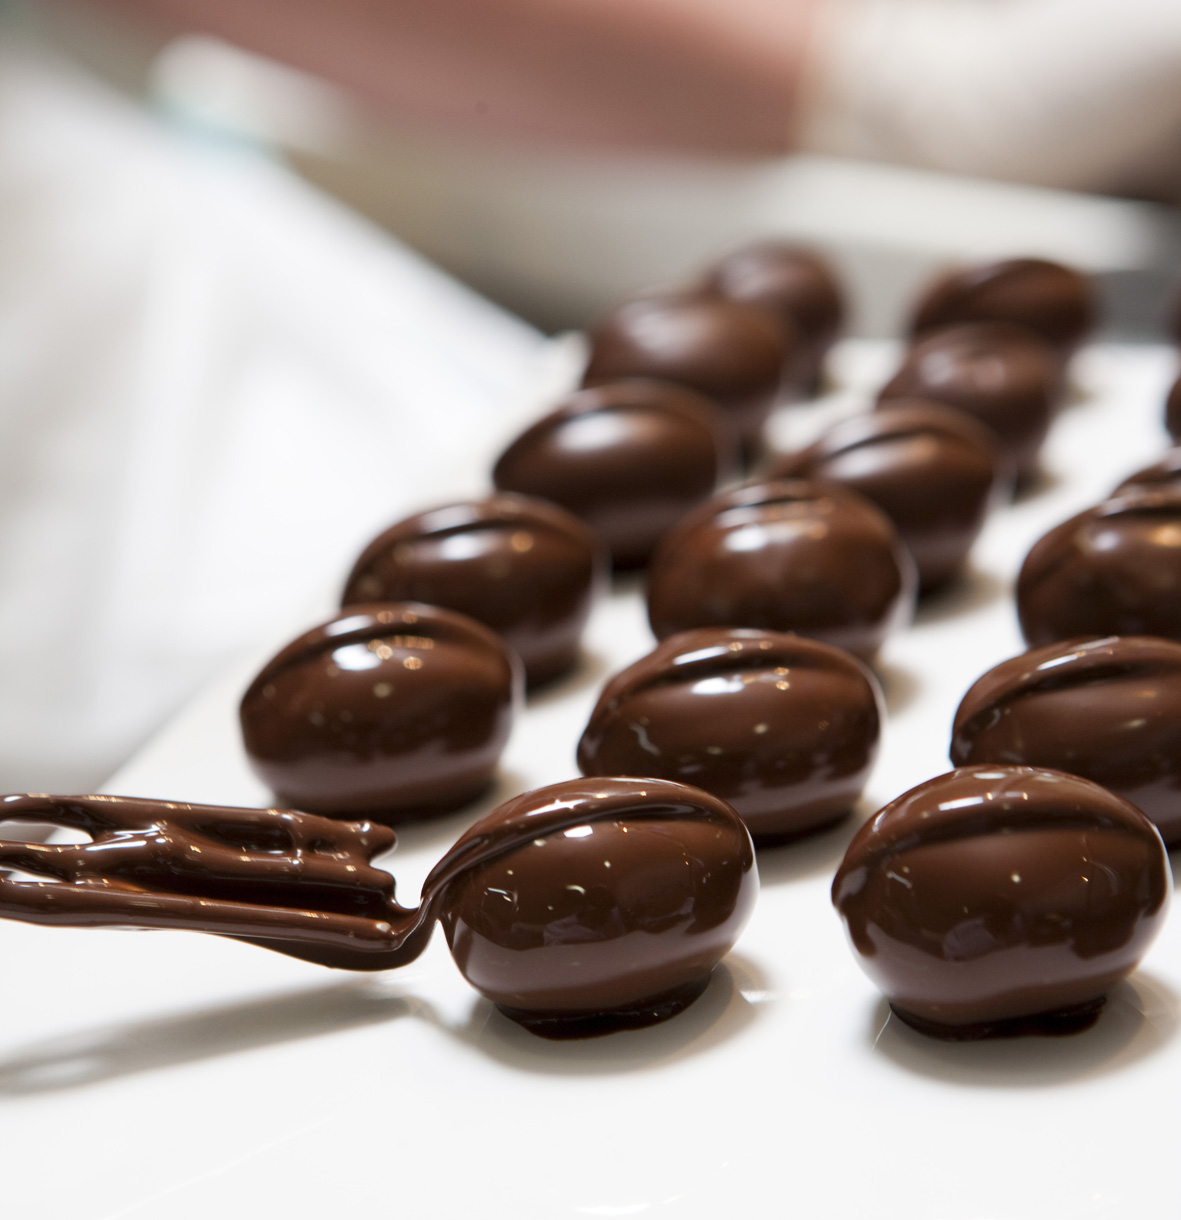 Chocoholics lick your lips because chocolate royalty is coming to Canberra